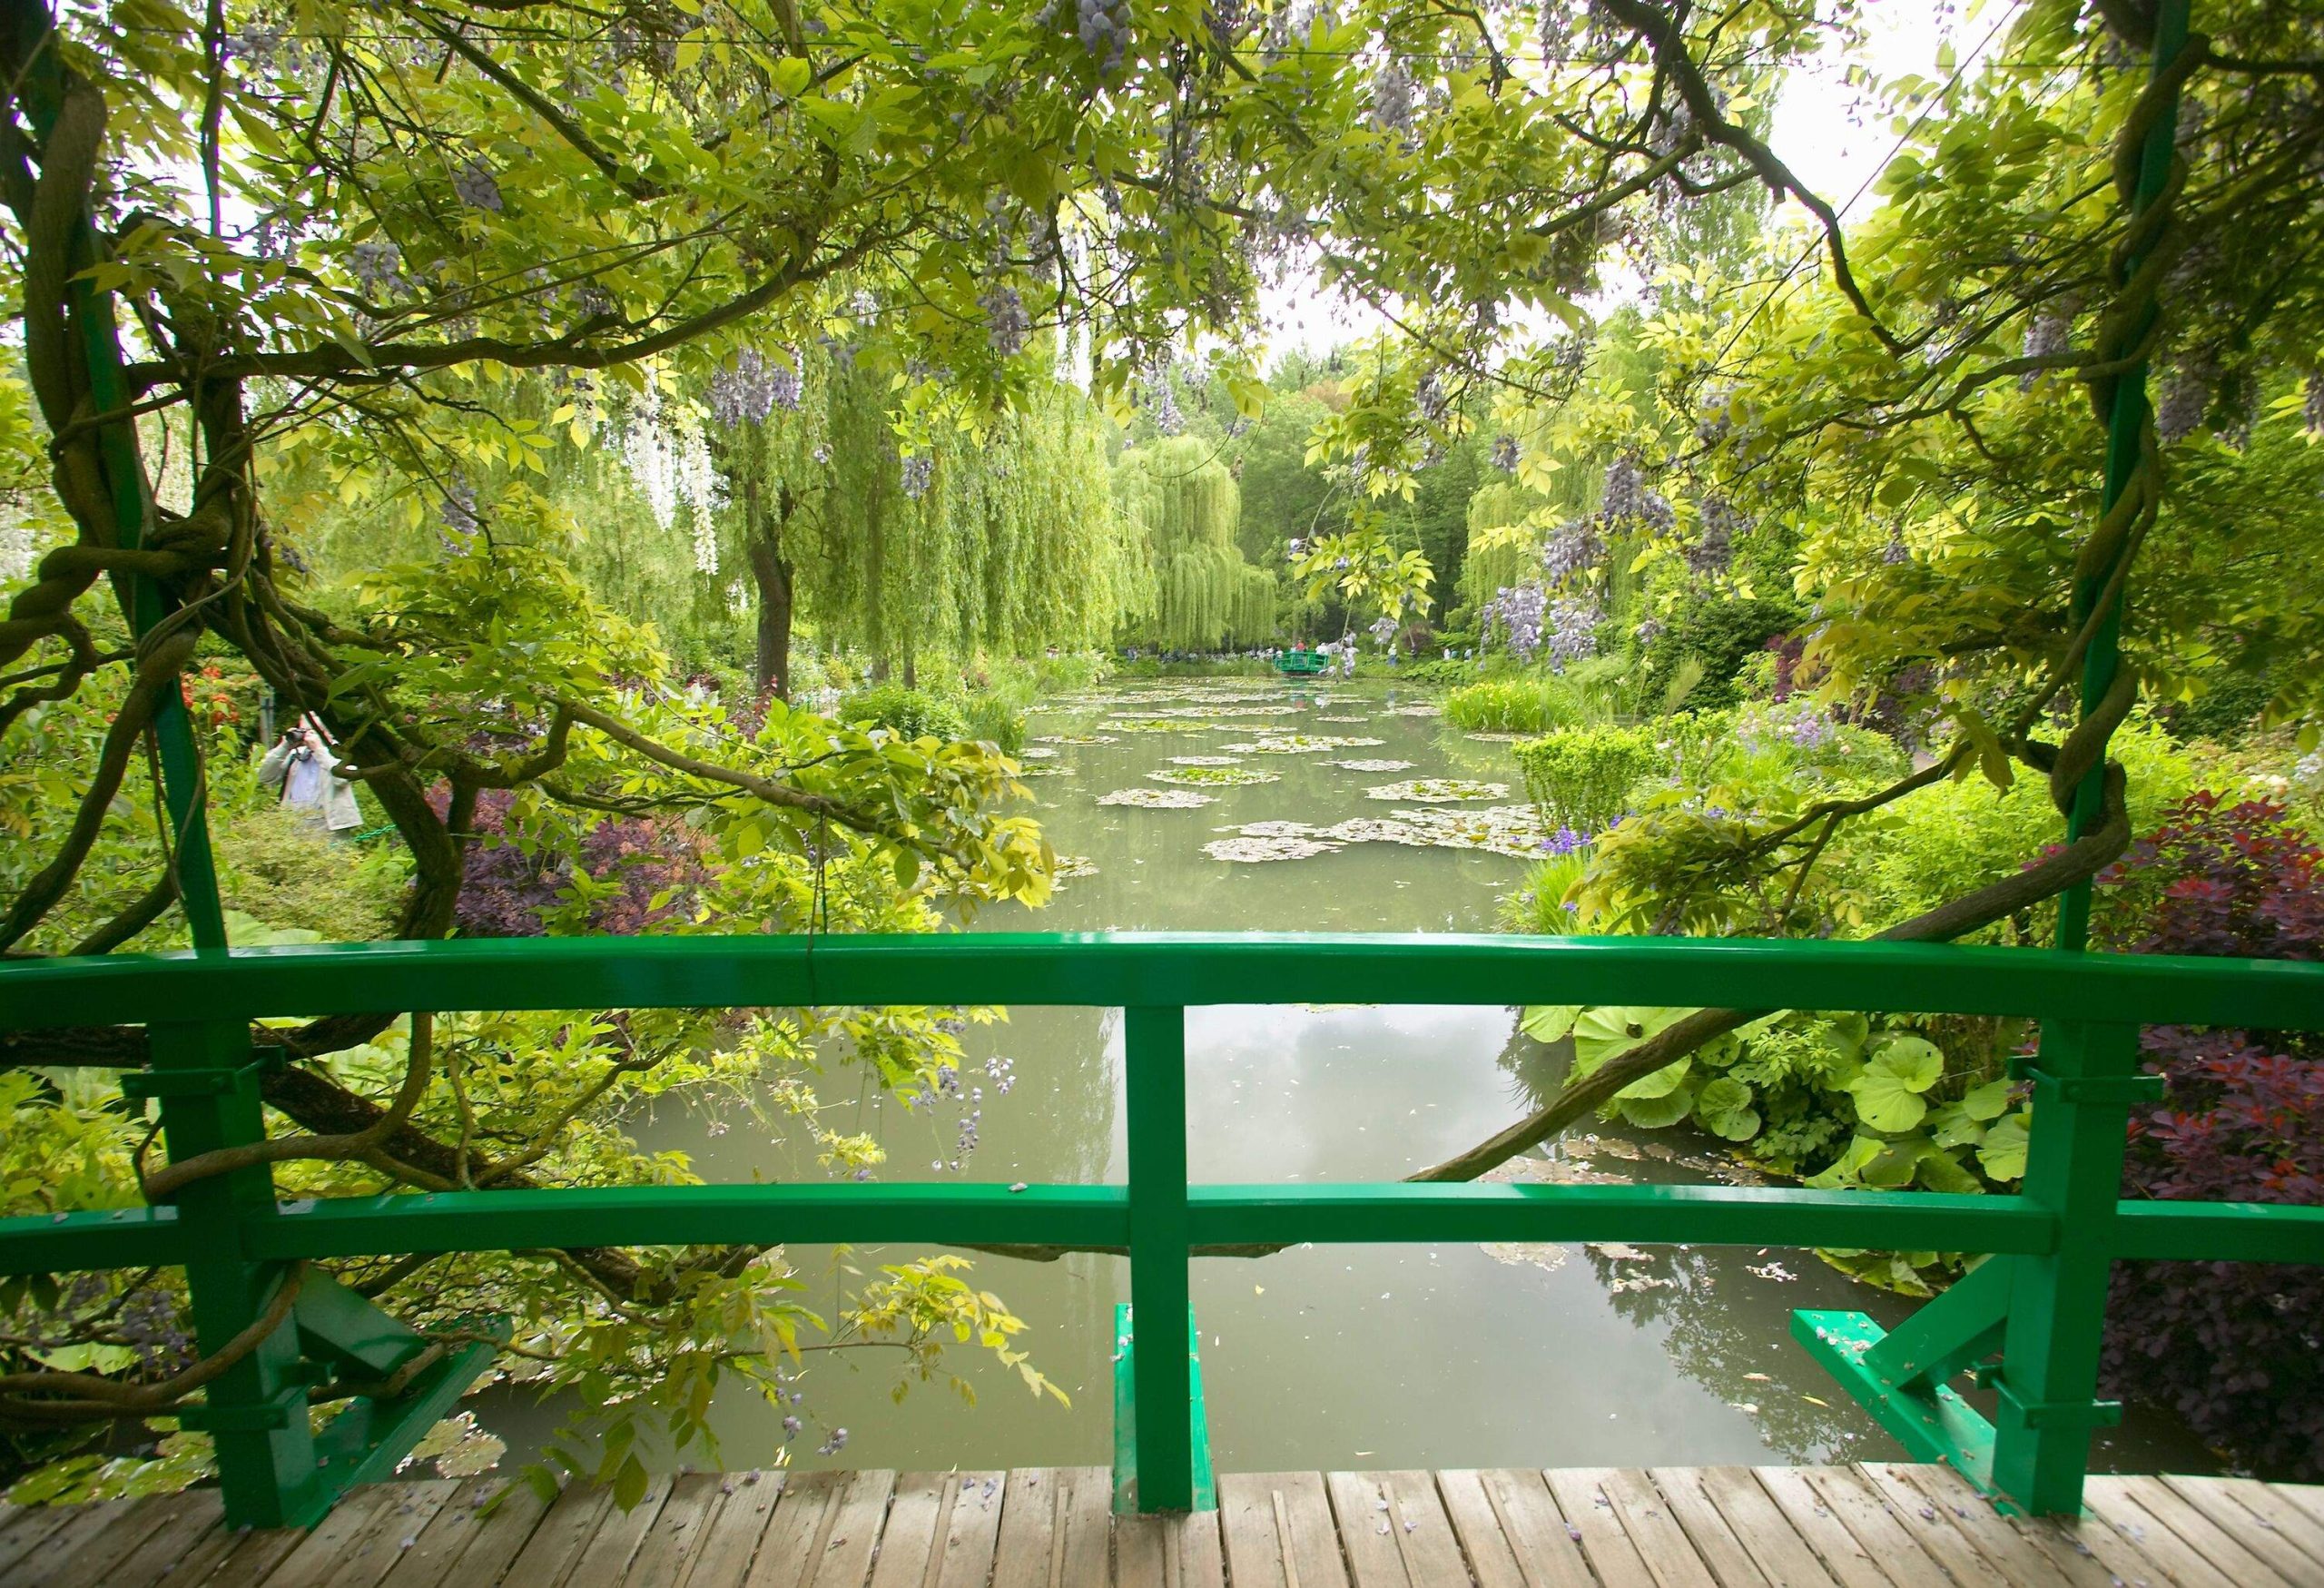 A bridge with a green fence across a pond surrounded by low-hanging trees and plants.